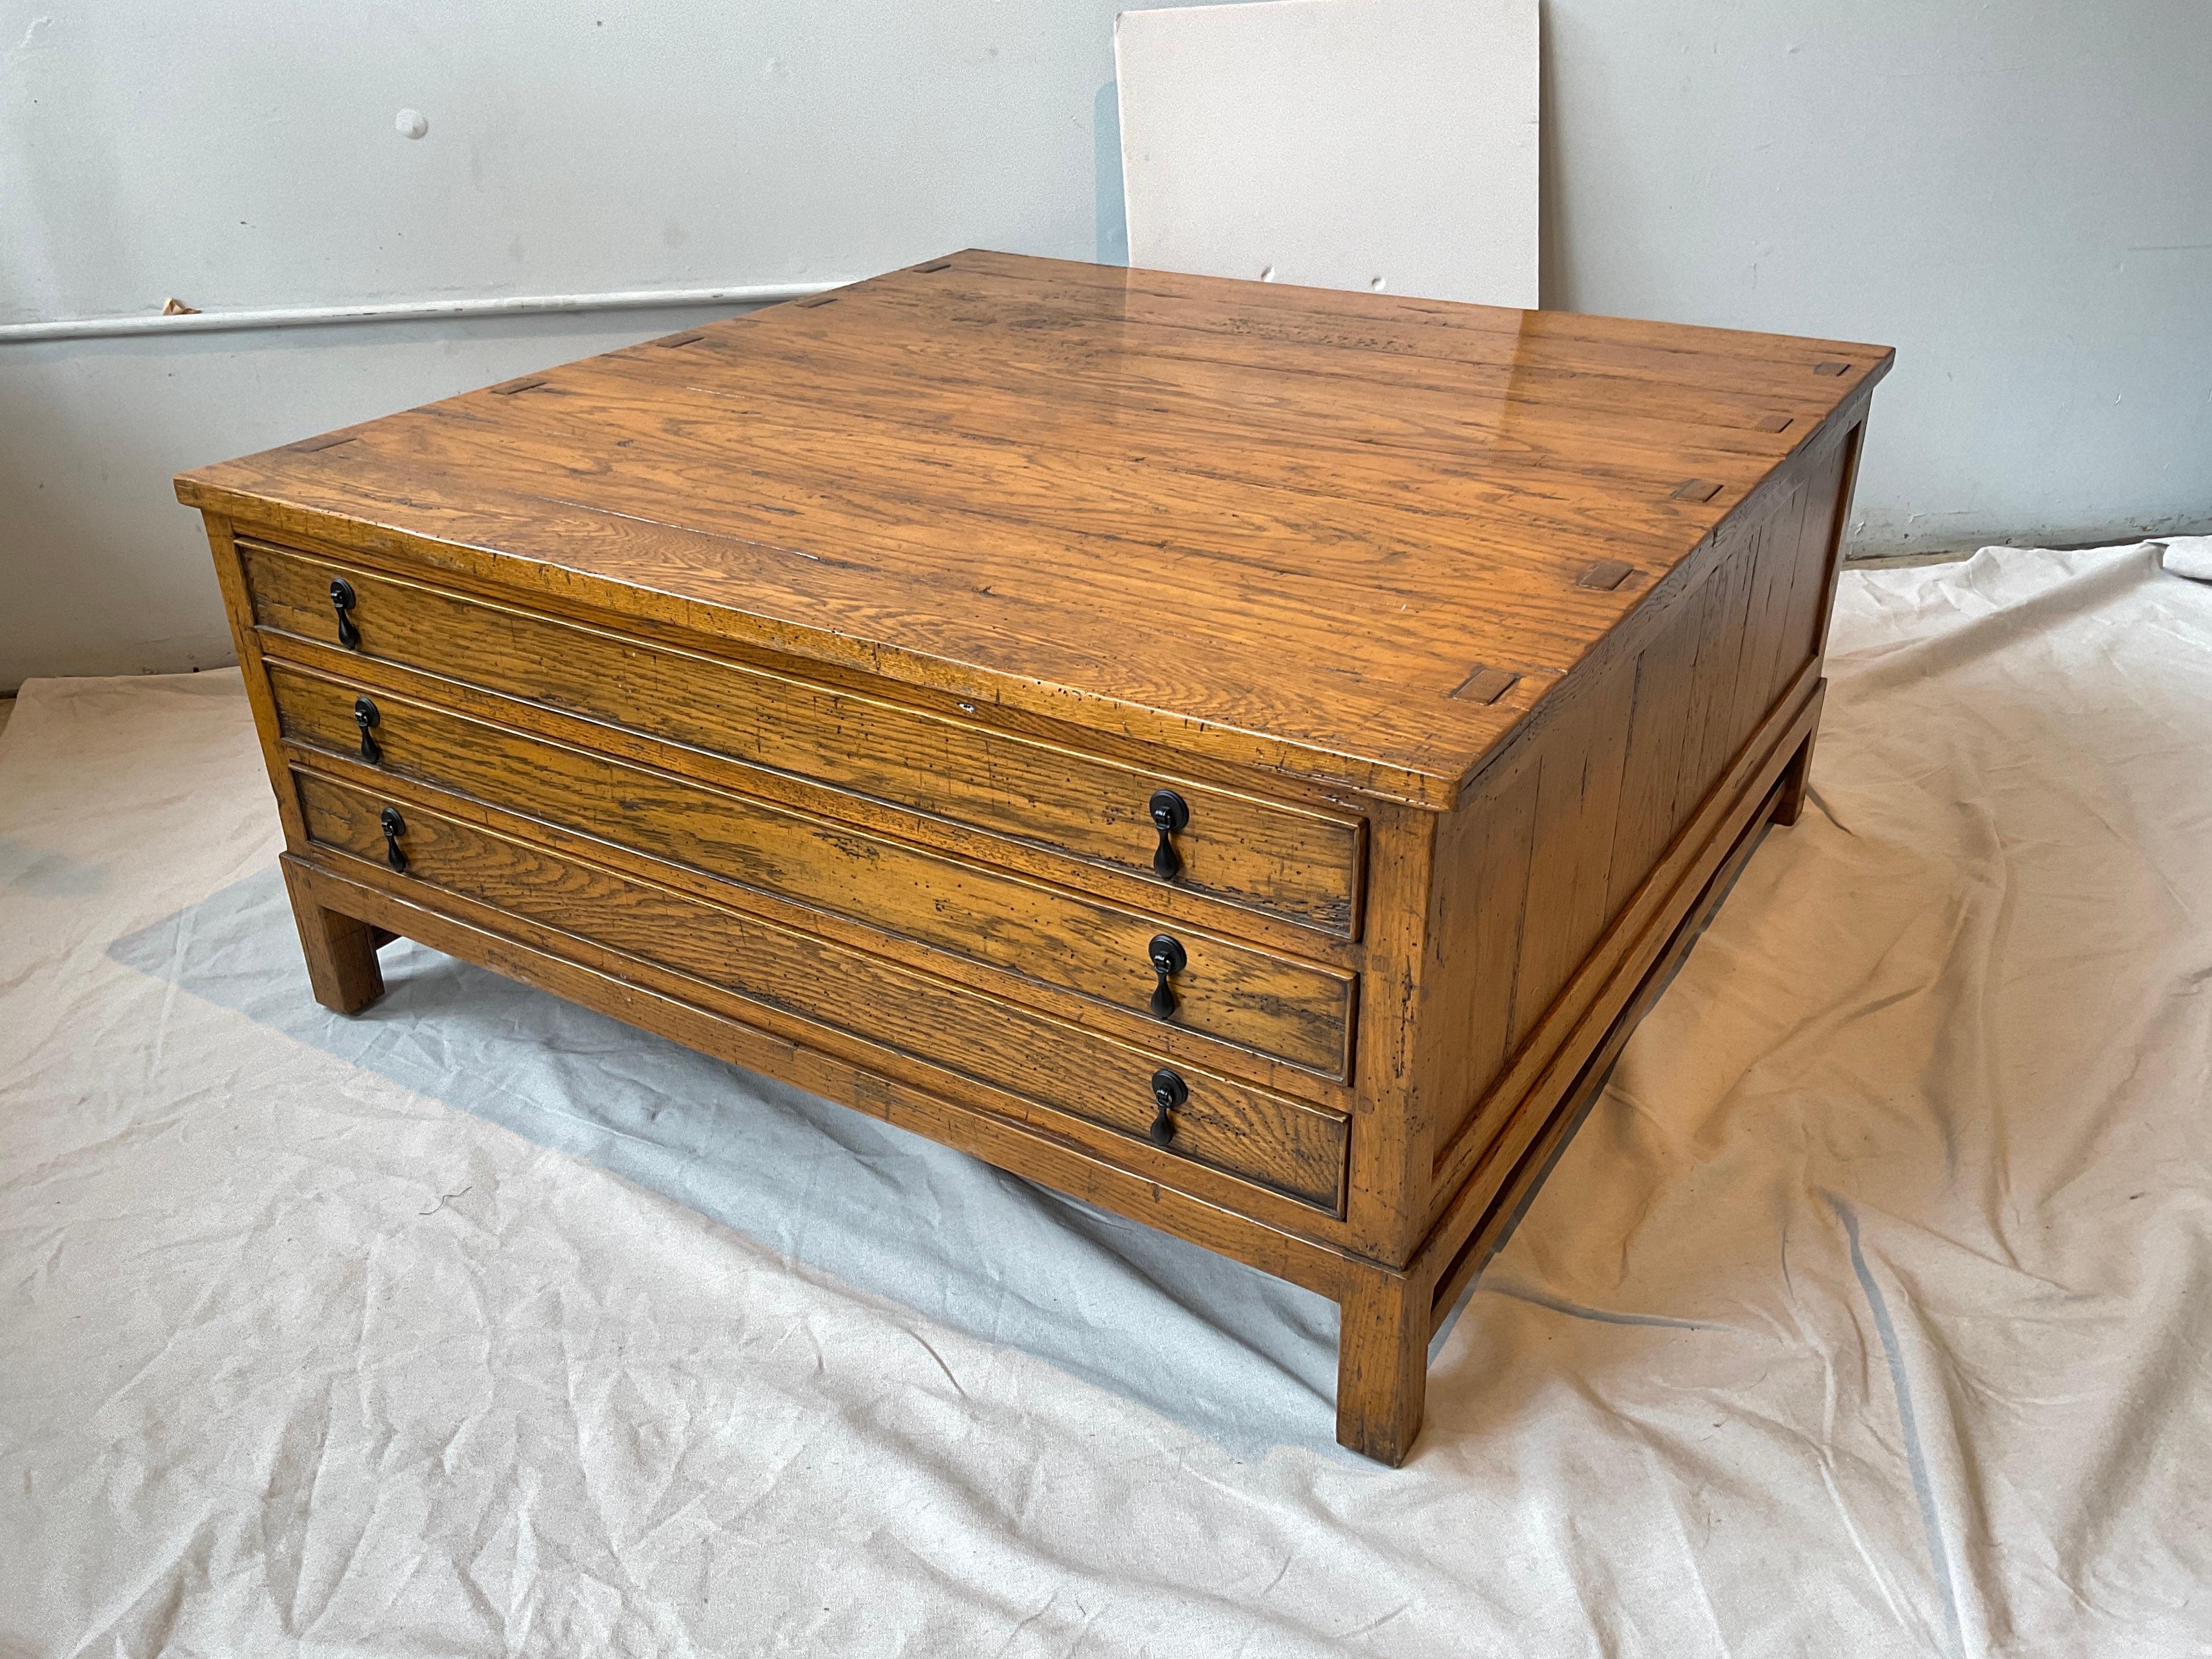 Guy Chaddock Clarence Collection coffee table. Drawers on both sides. 